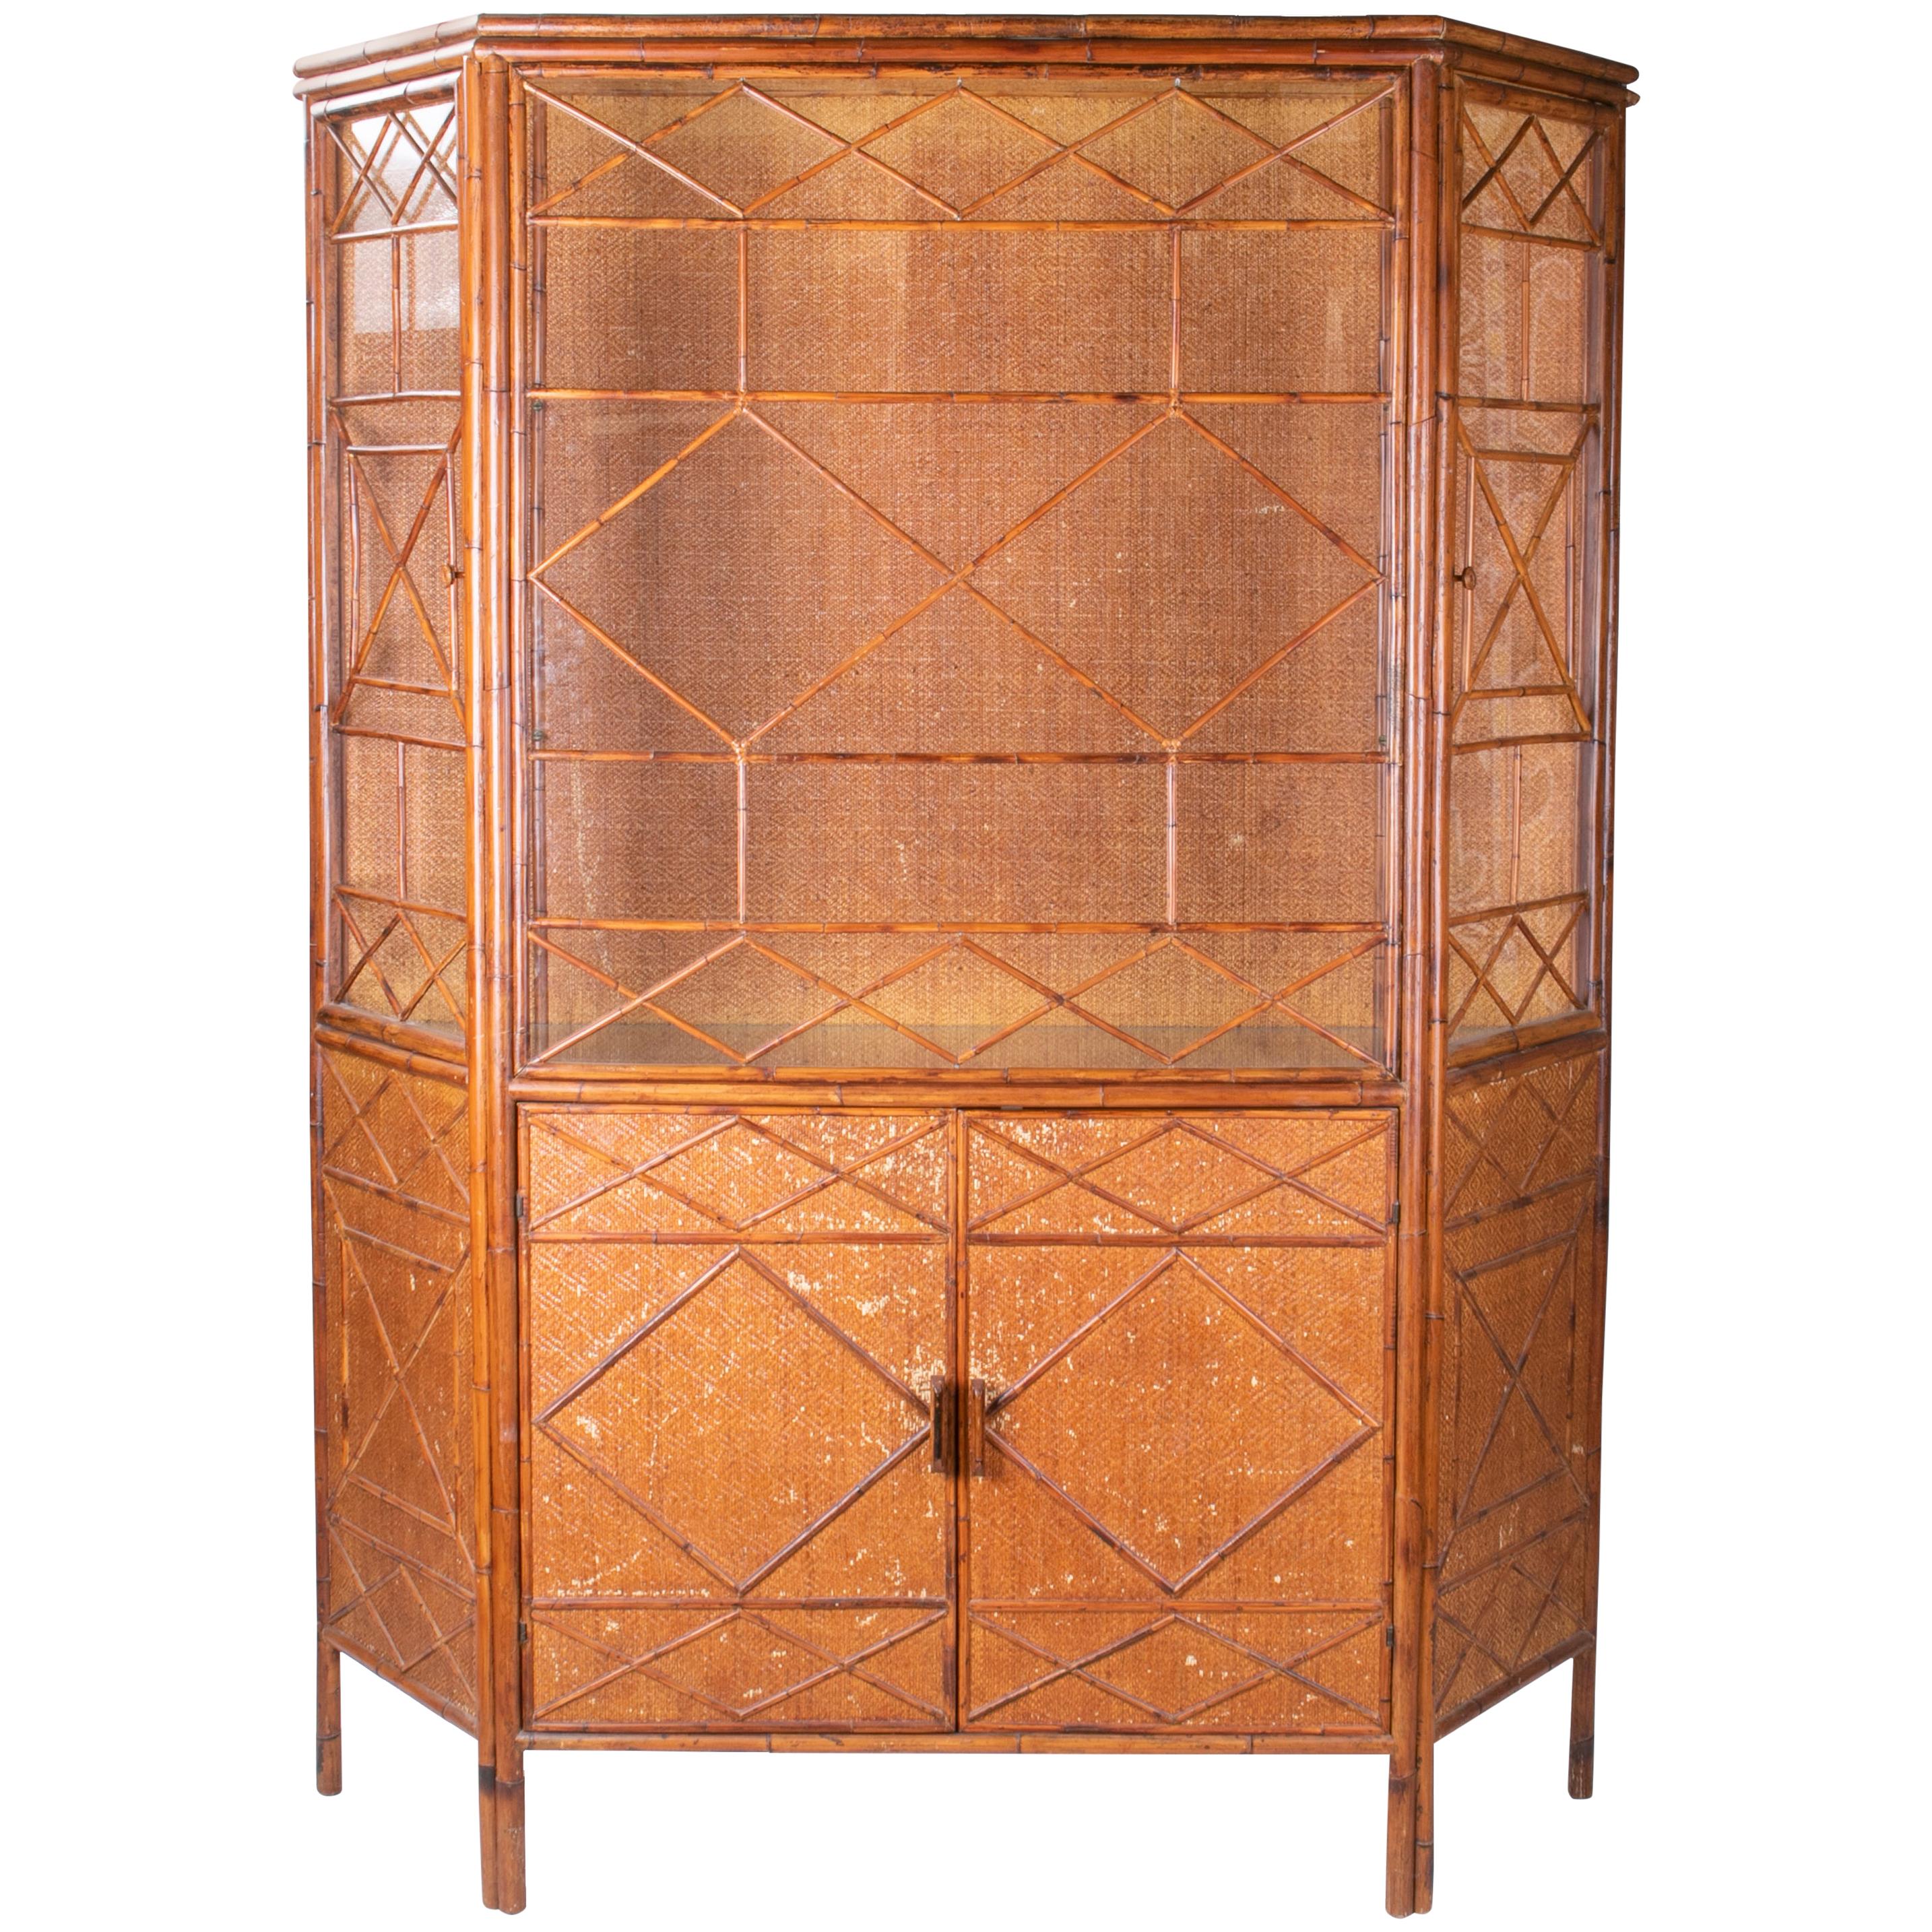 1950s English Bamboo and Rattan Glass Cabinet